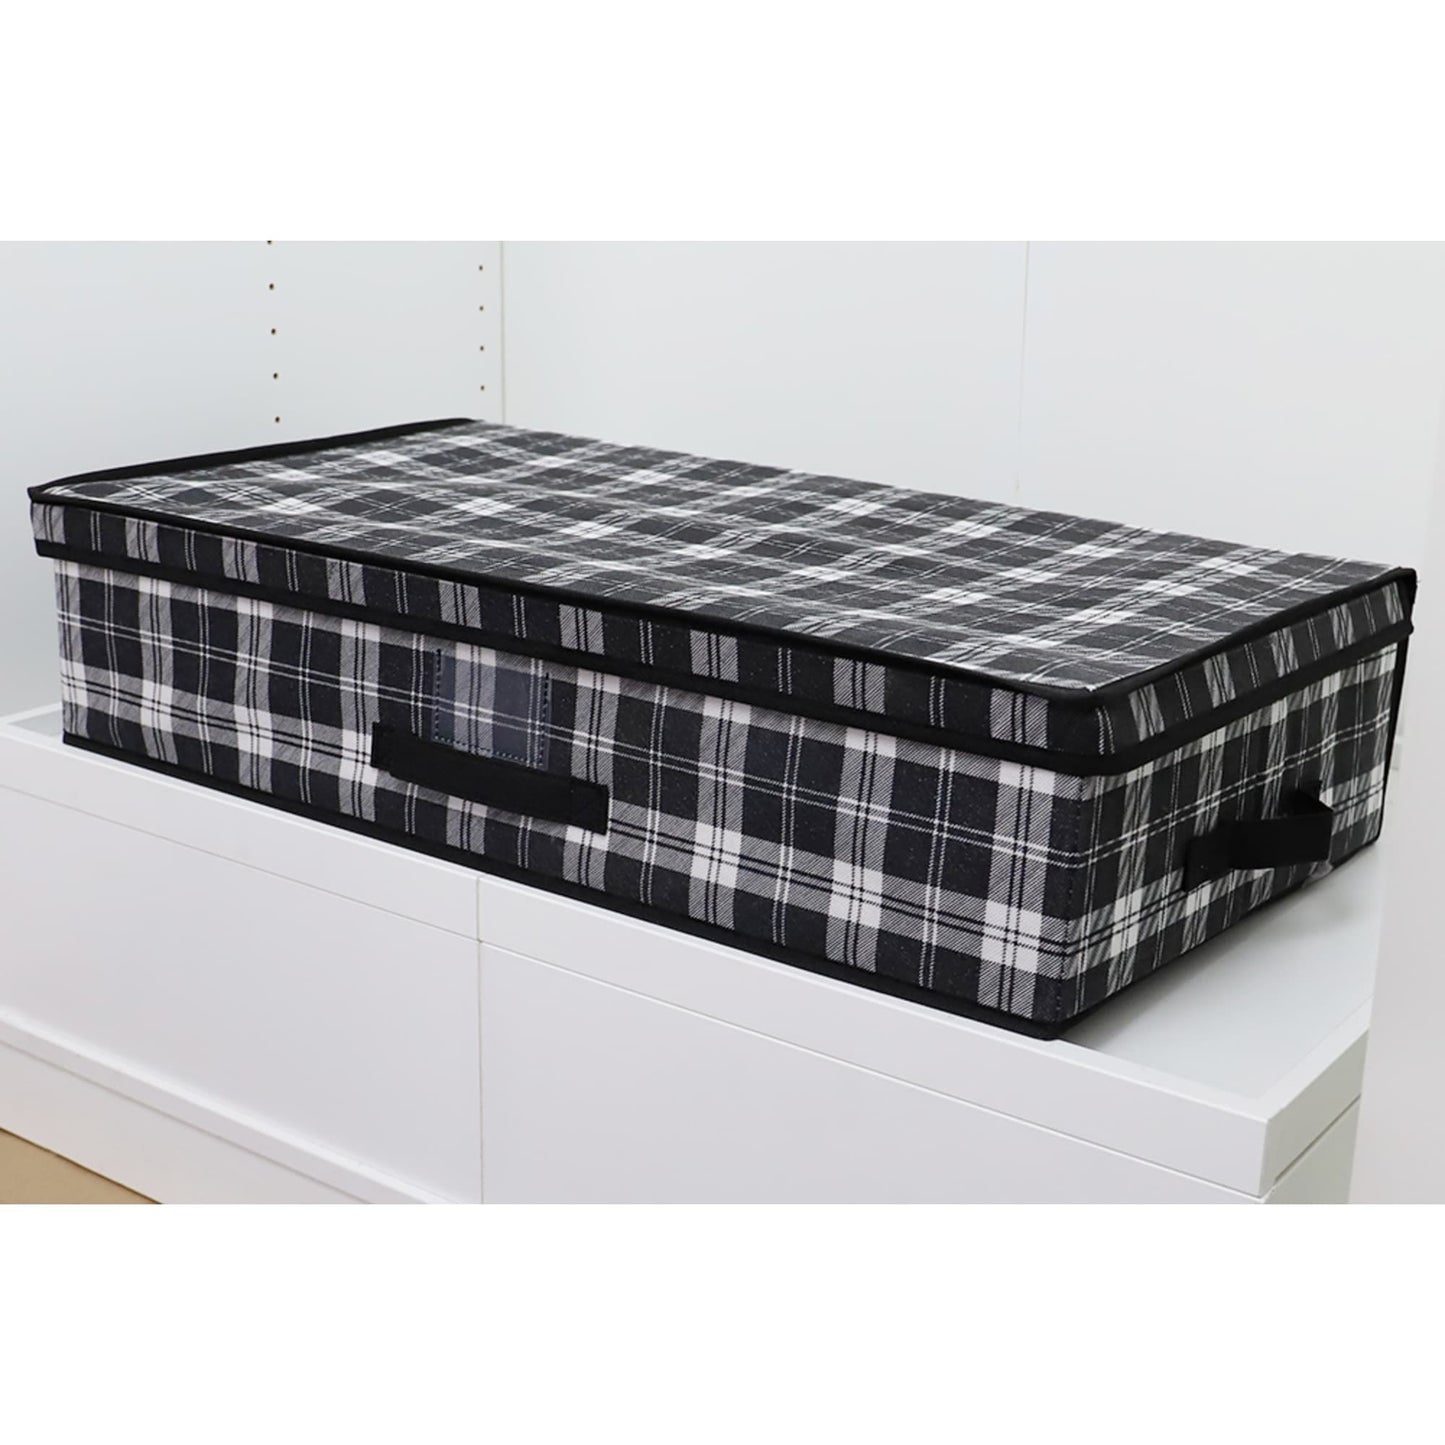 Plaid Non-Woven Under the Bed Storage Box with Label Window, Black